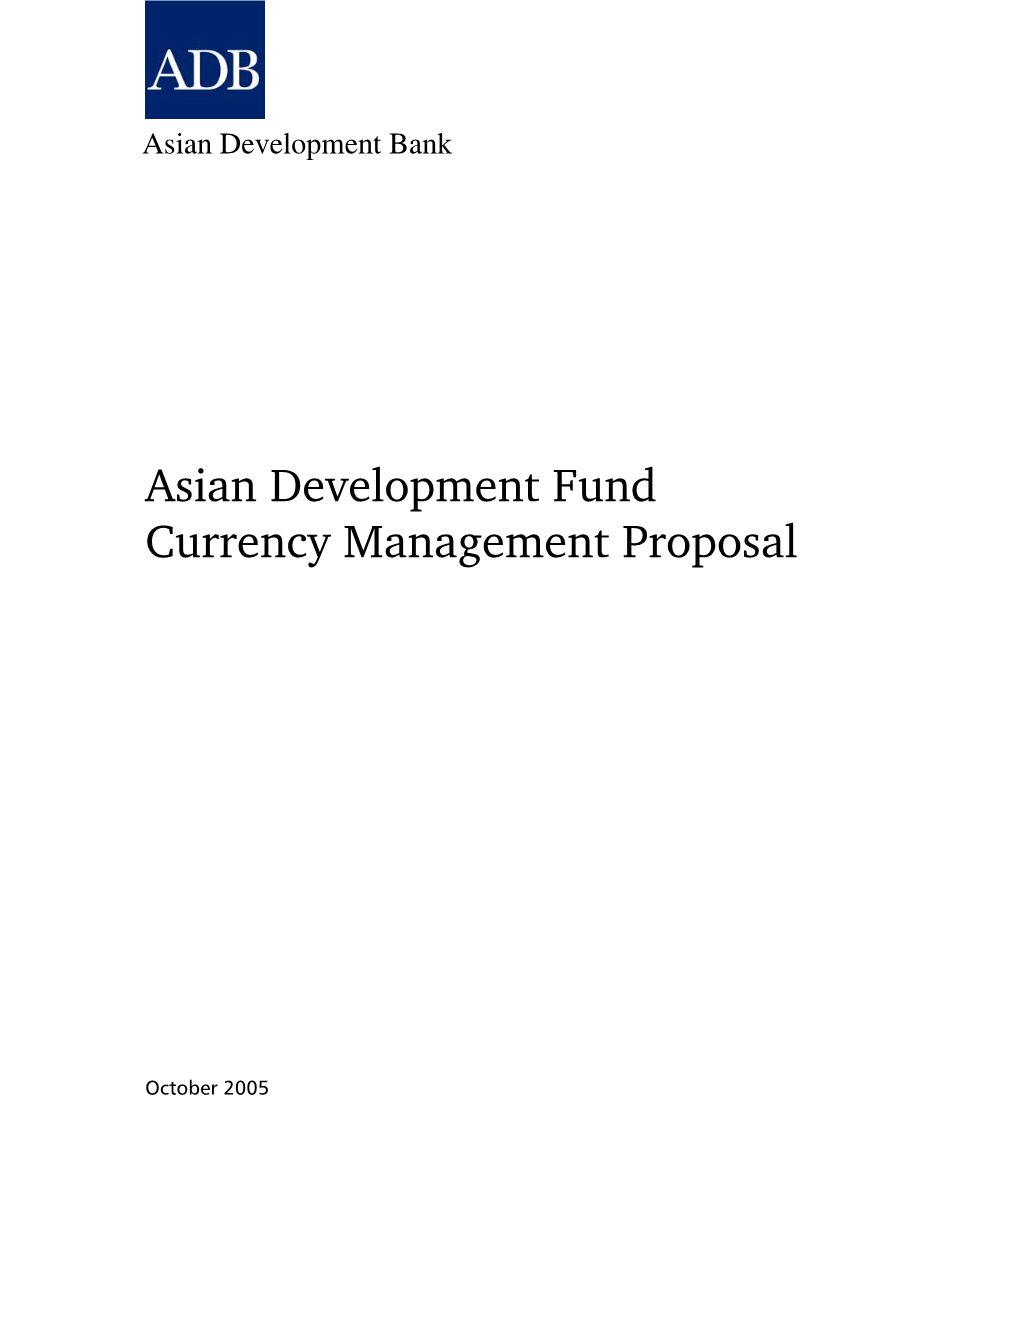 Asian Development Fund Currency Management Proposal